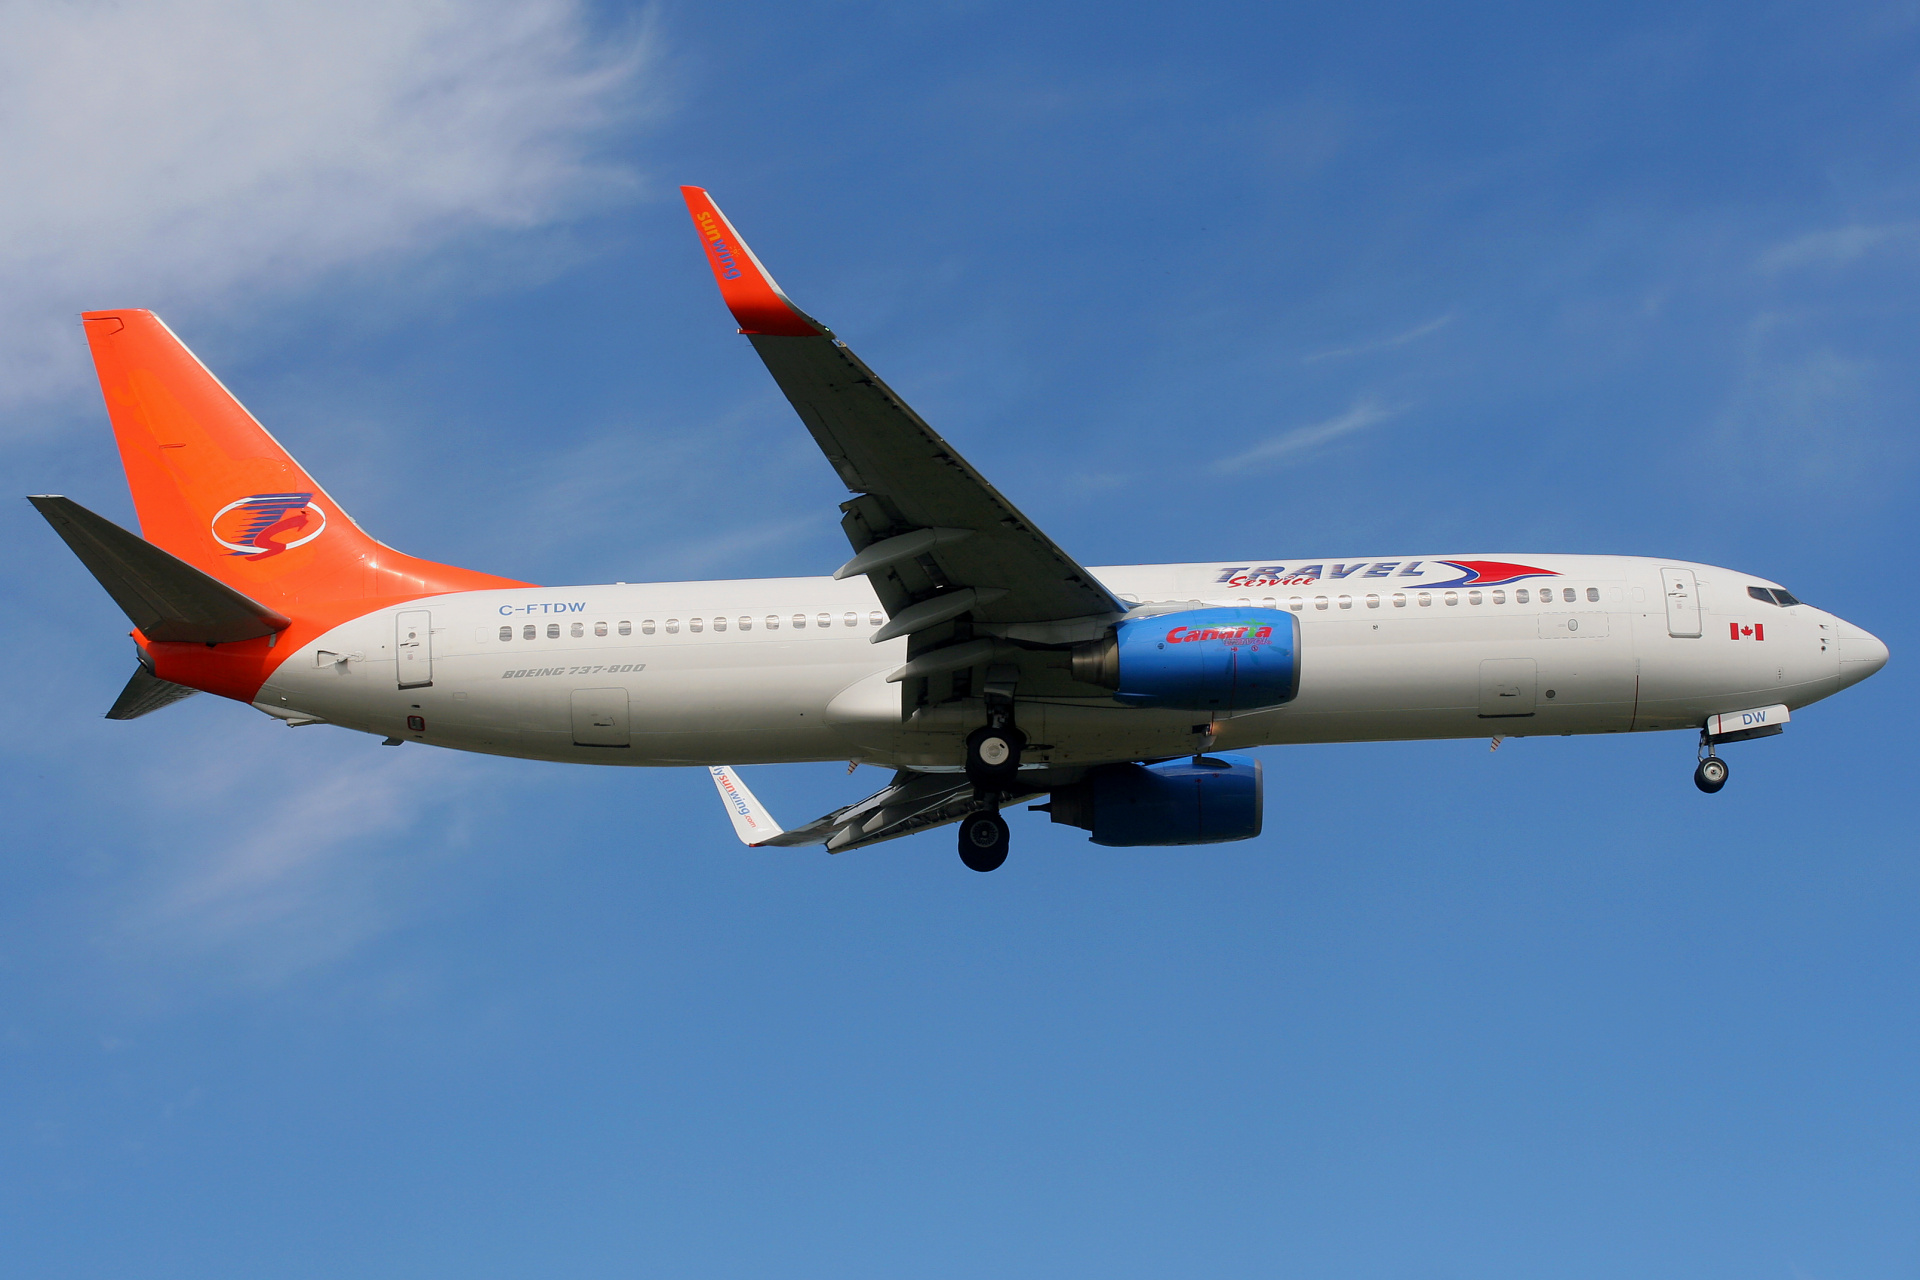 C-FTDW (Sunwing) (Aircraft » EPWA Spotting » Boeing 737-800 » Travel Service Airlines)